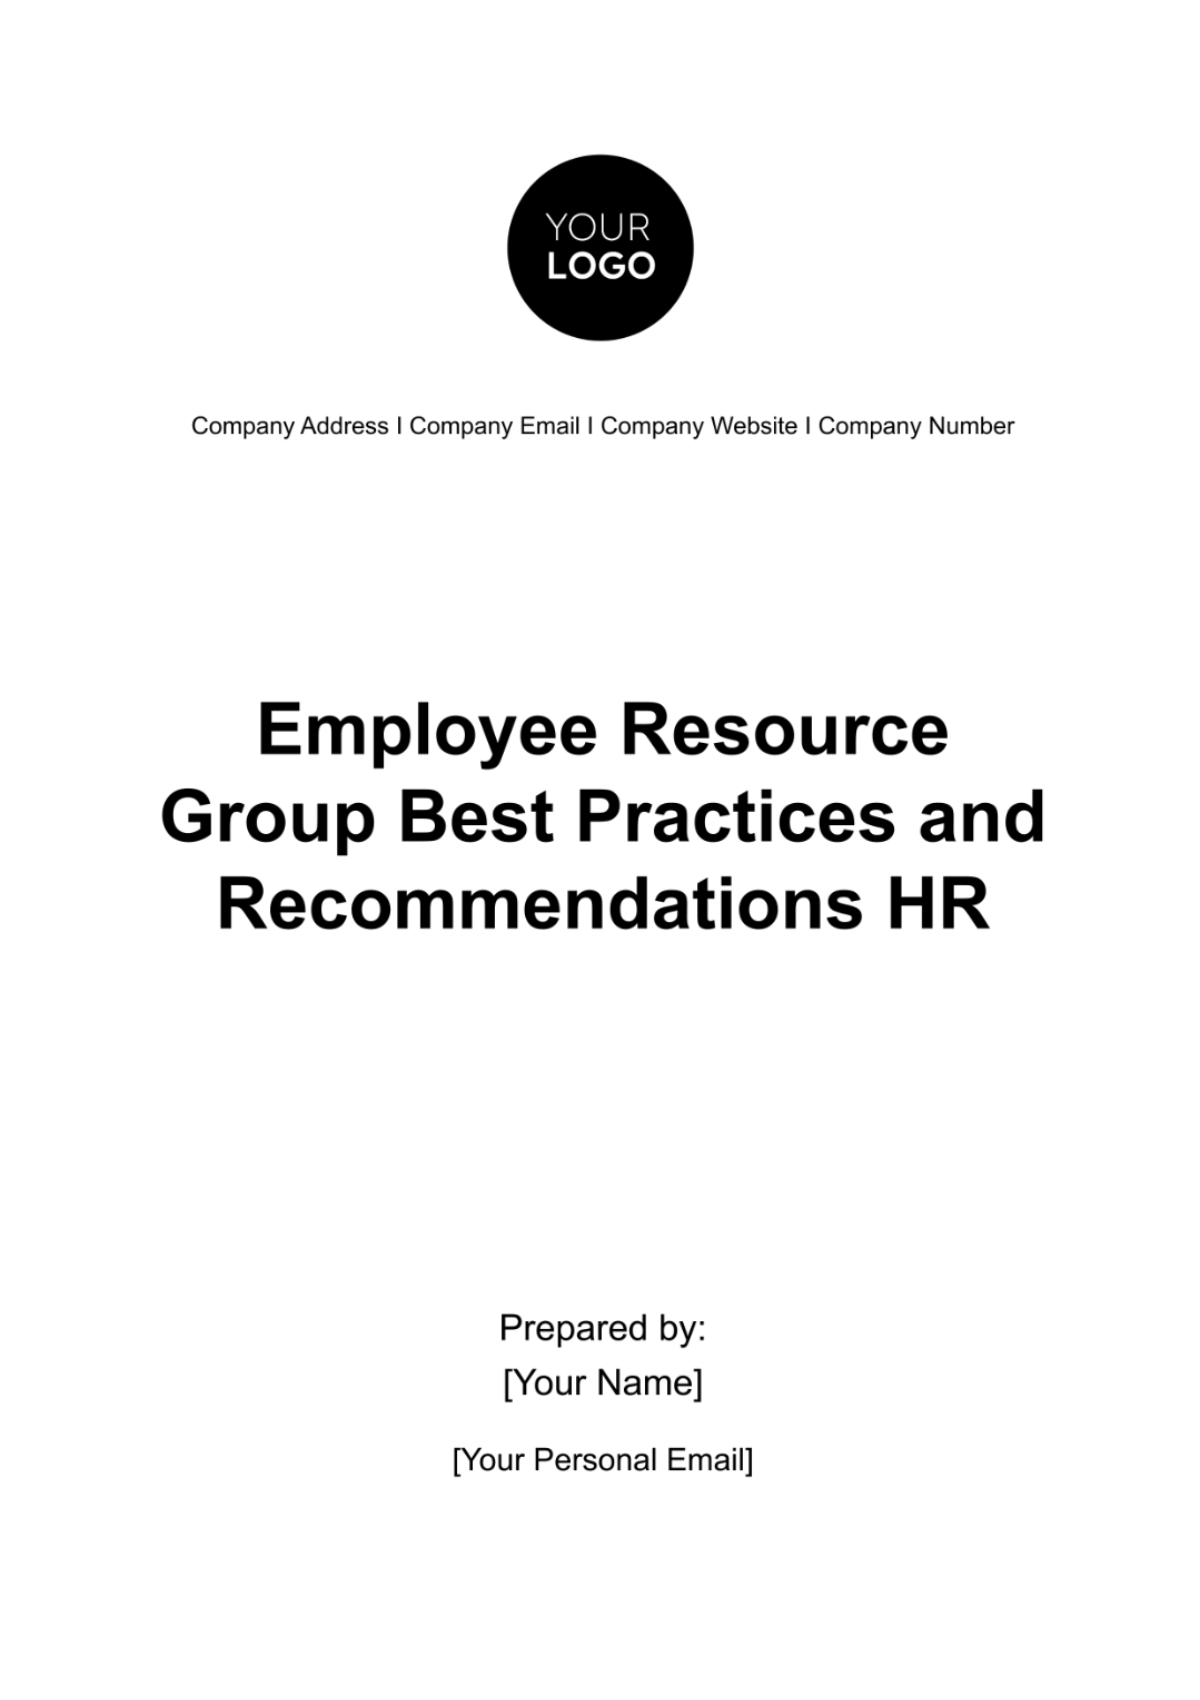 Employee Resource Group Best Practices and Recommendations HR Template